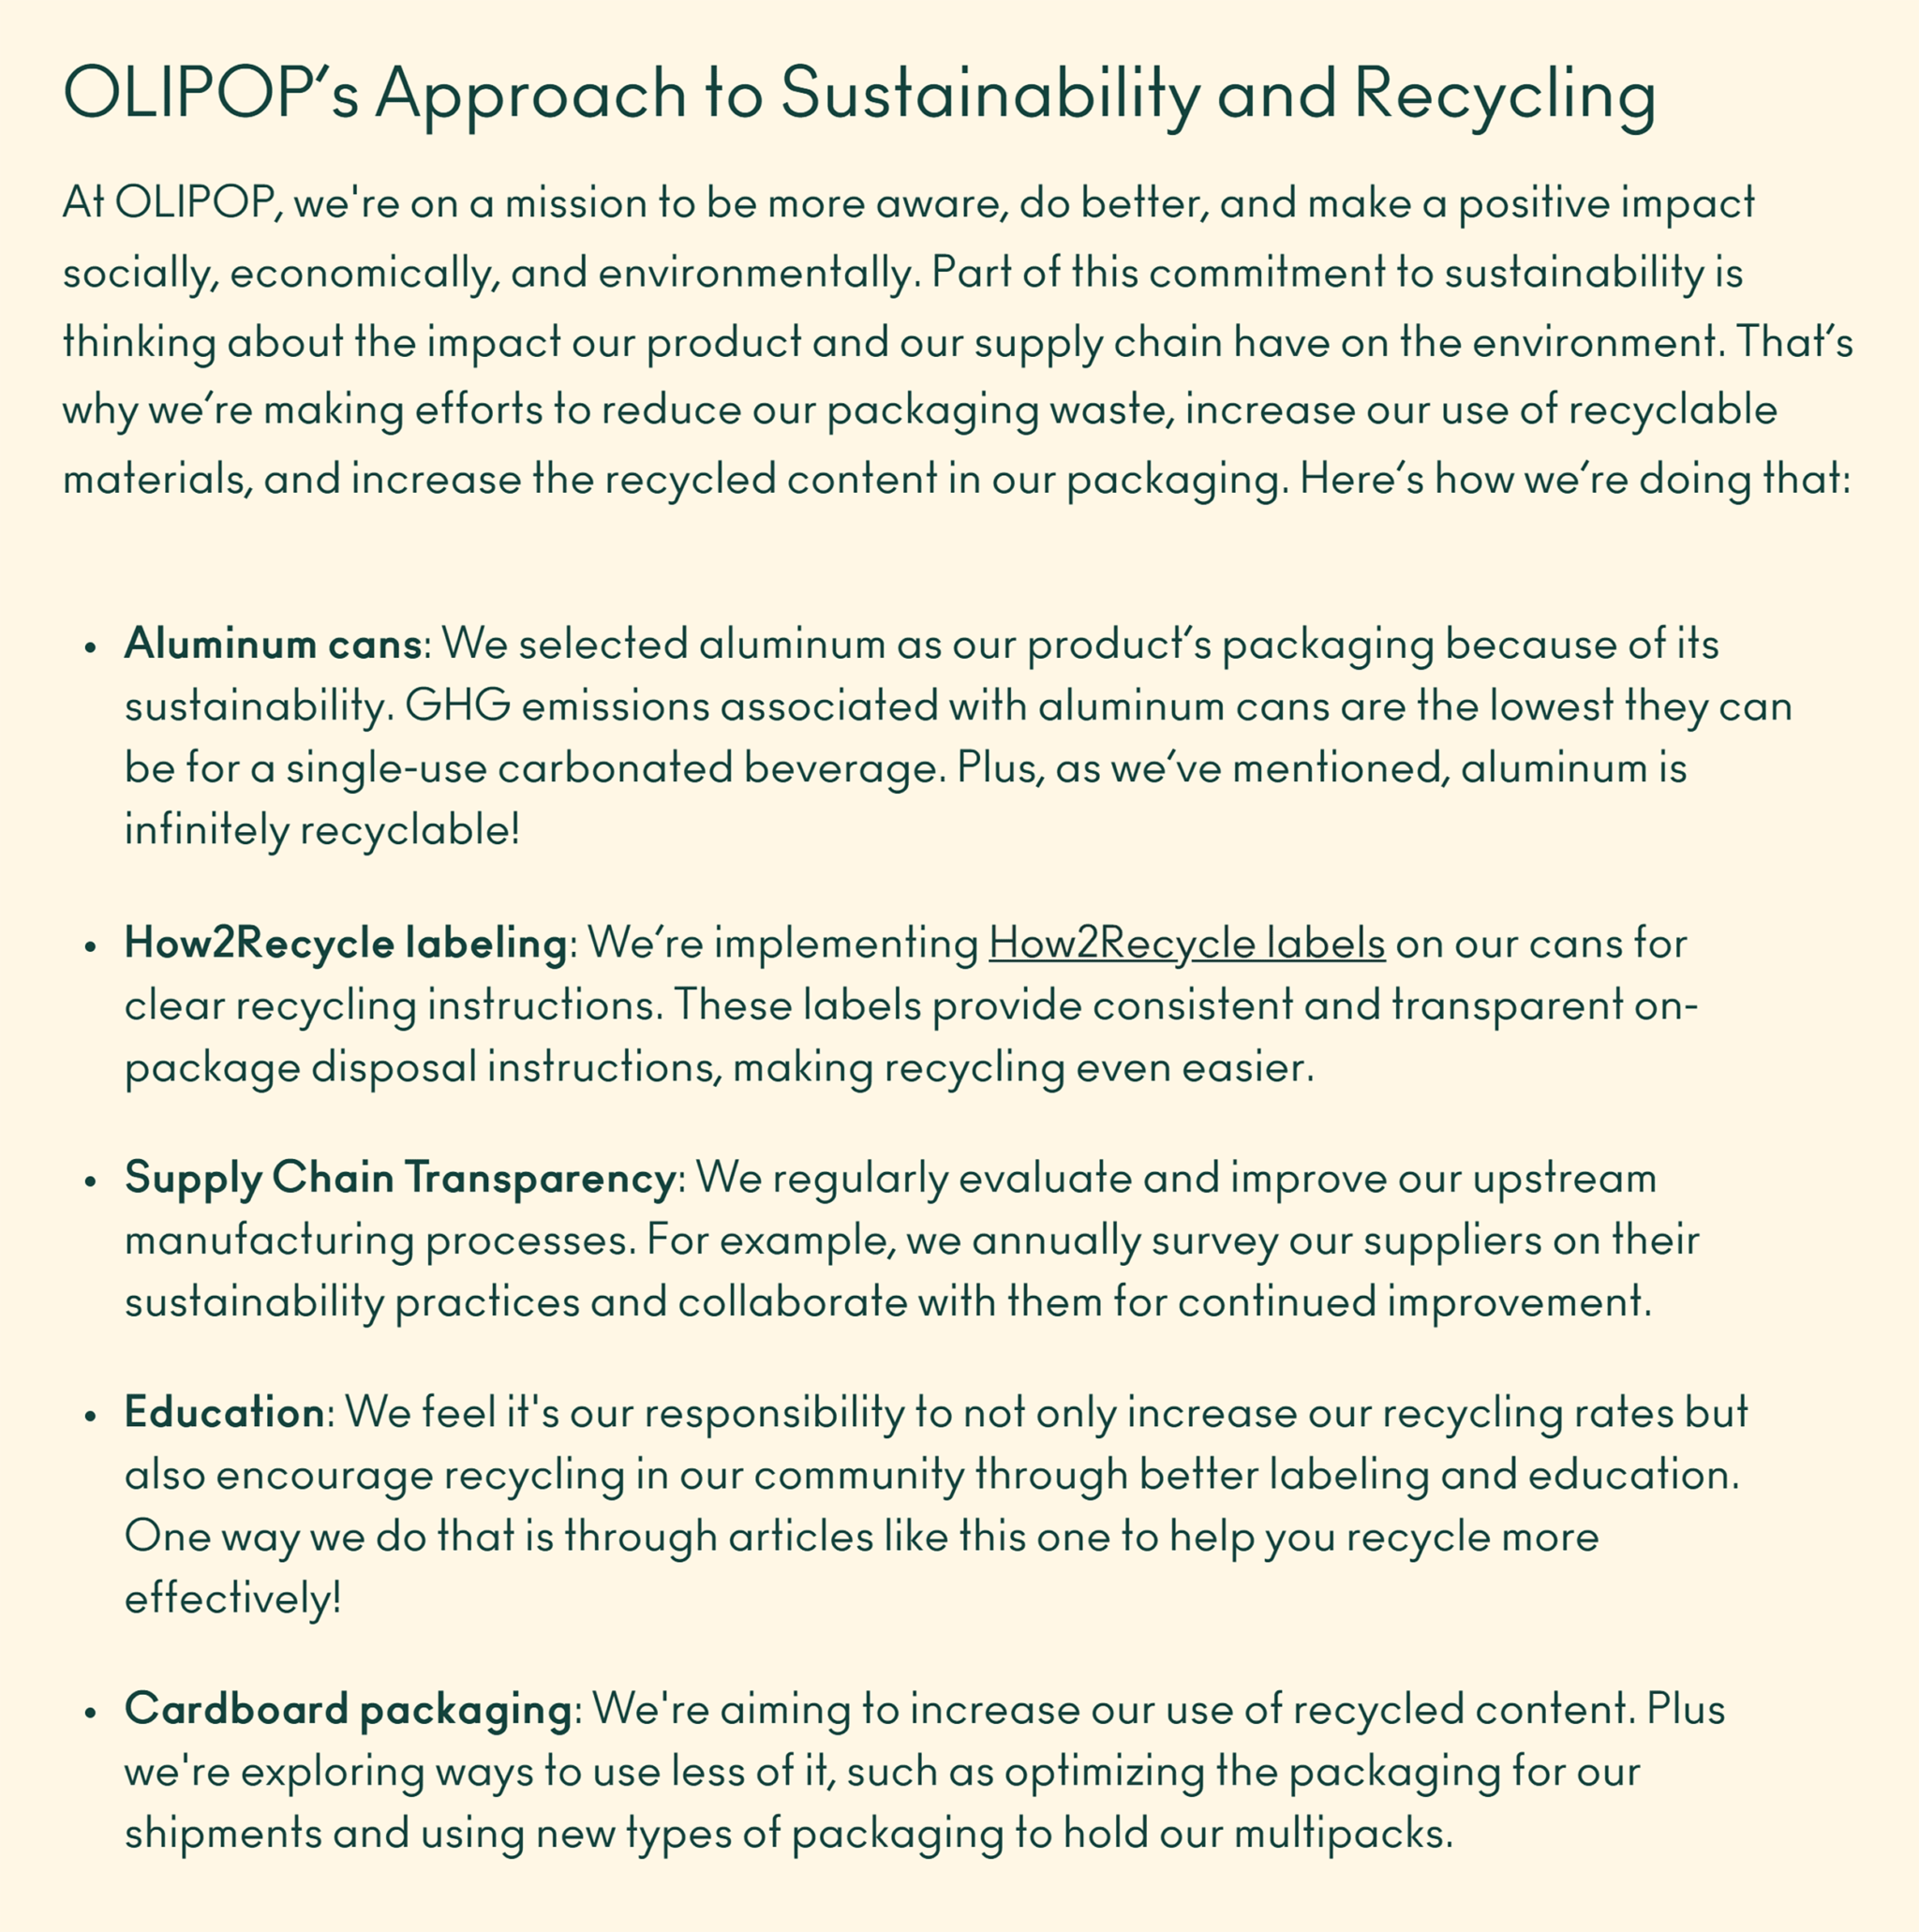 olipop-recycling-approach 22 Content Marketing Examples to Inspire You